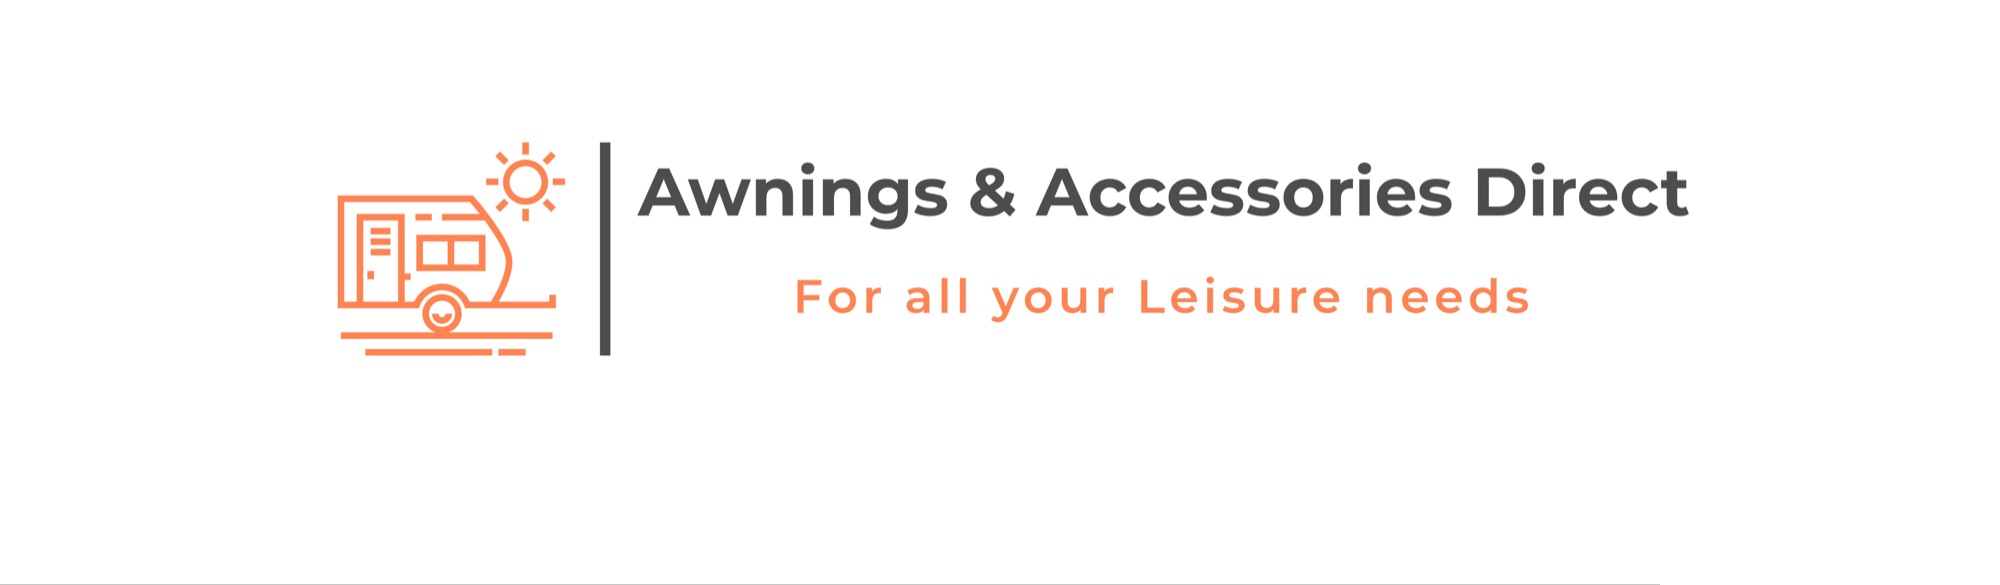 Awnings and Accessories Direct 